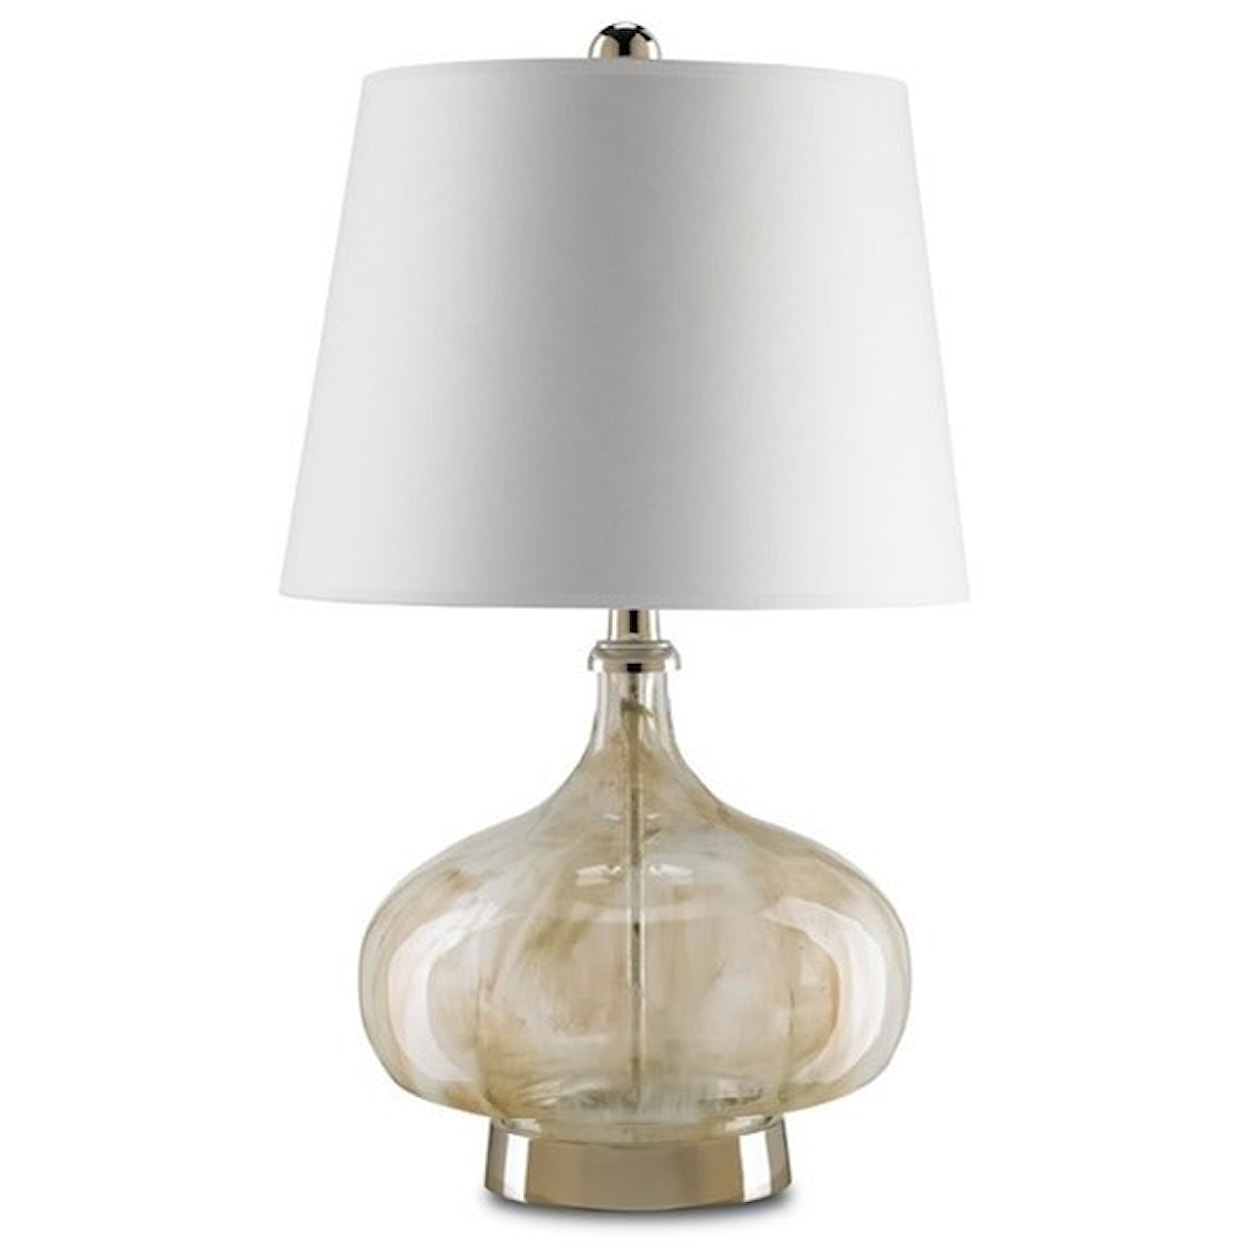 Currey & Co Lighting - Currey Table Lamp